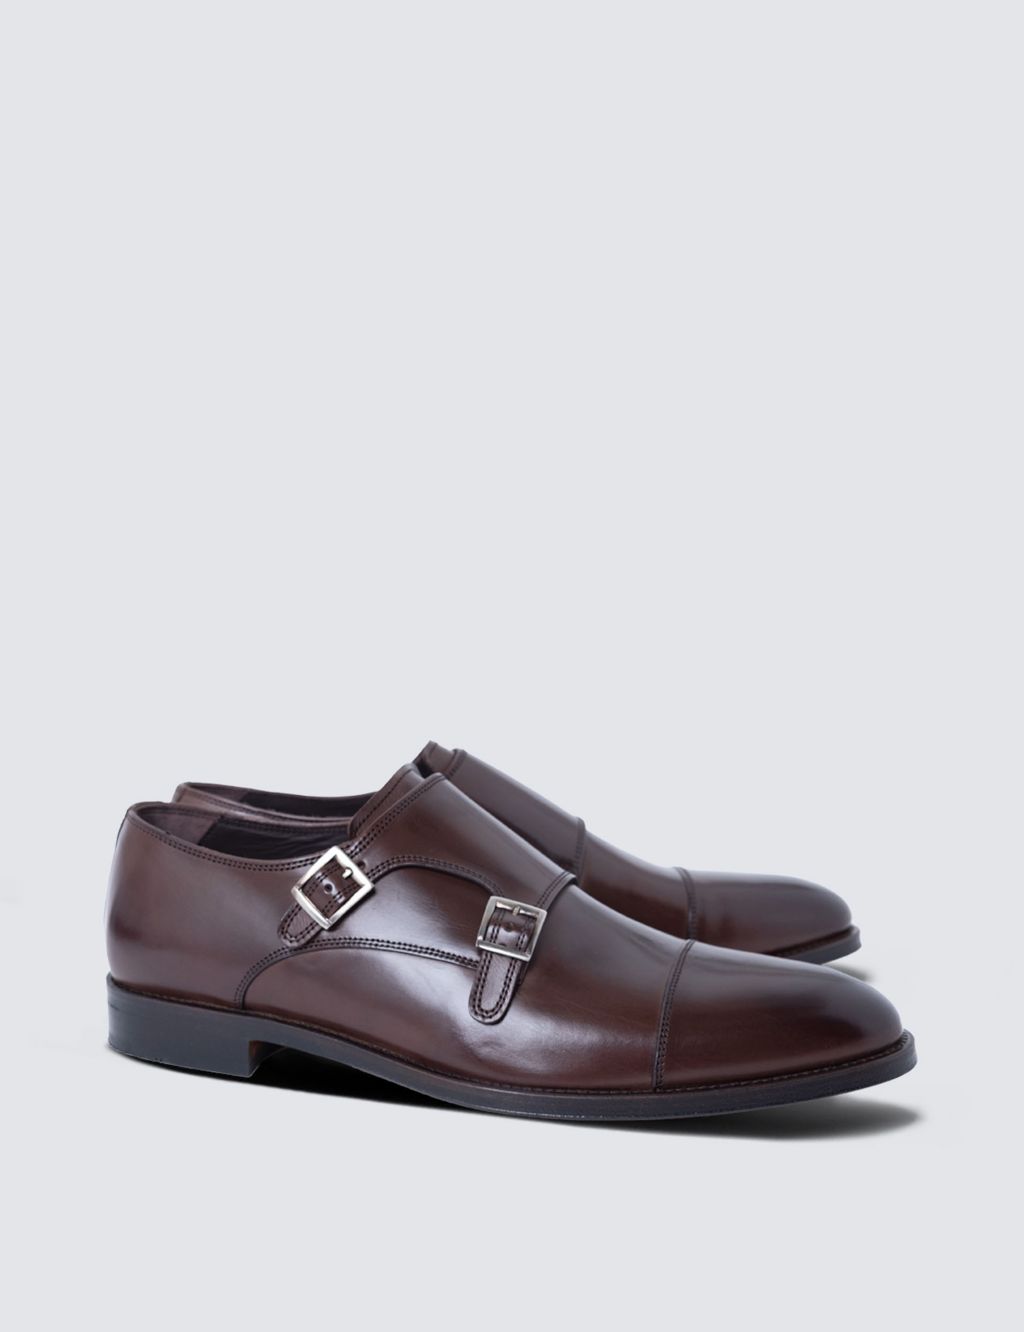 Wide Fit Leather Double Monk Strap Shoes image 2